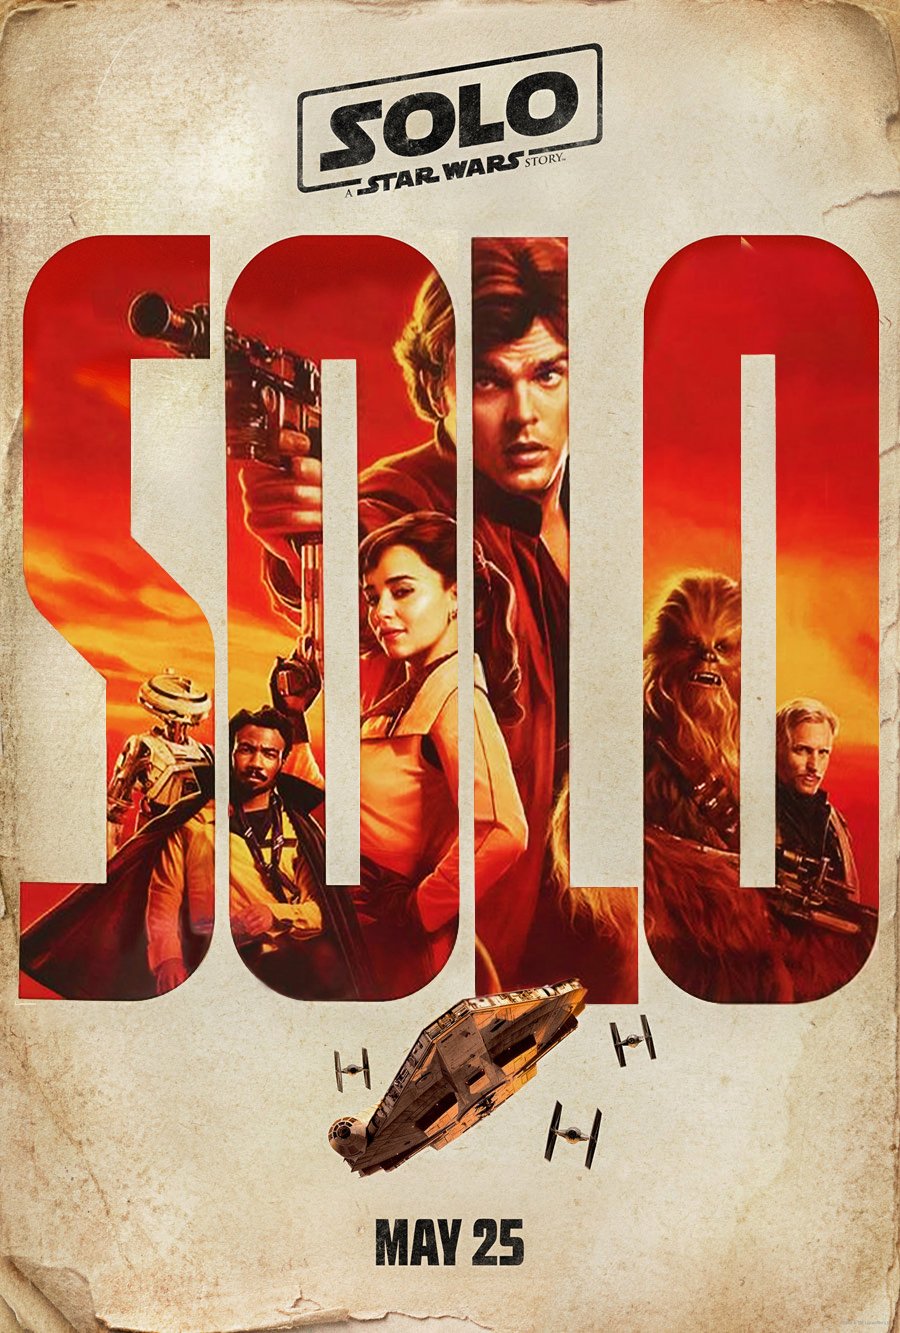 Solo Star Wars Story Movie Poster